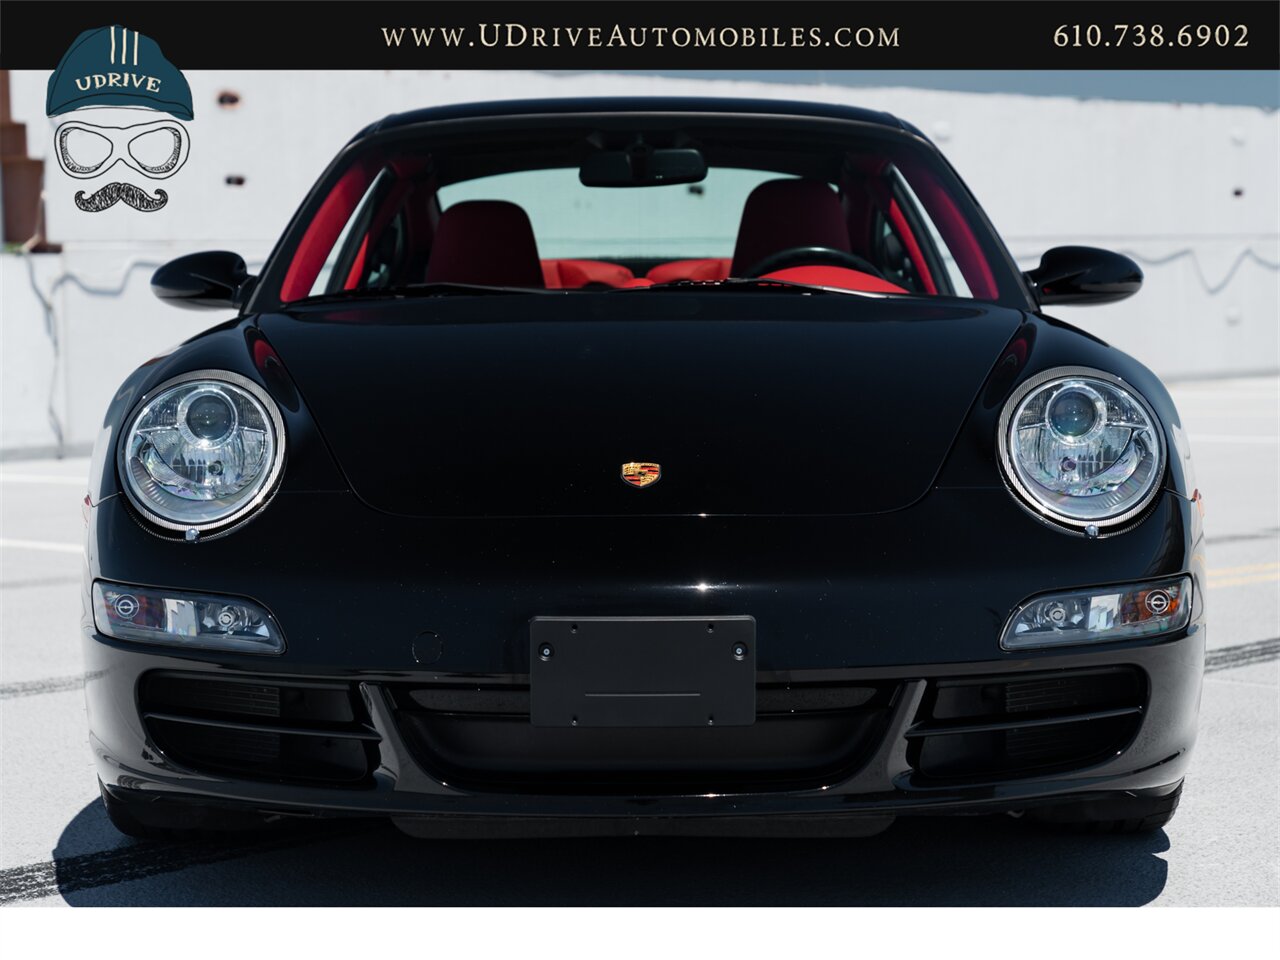 2005 Porsche 911 Carrera 911S 997 6 Speed 13k Miles Chrono  Leather to Sample Boxster Red/Blk Service History - Photo 13 - West Chester, PA 19382